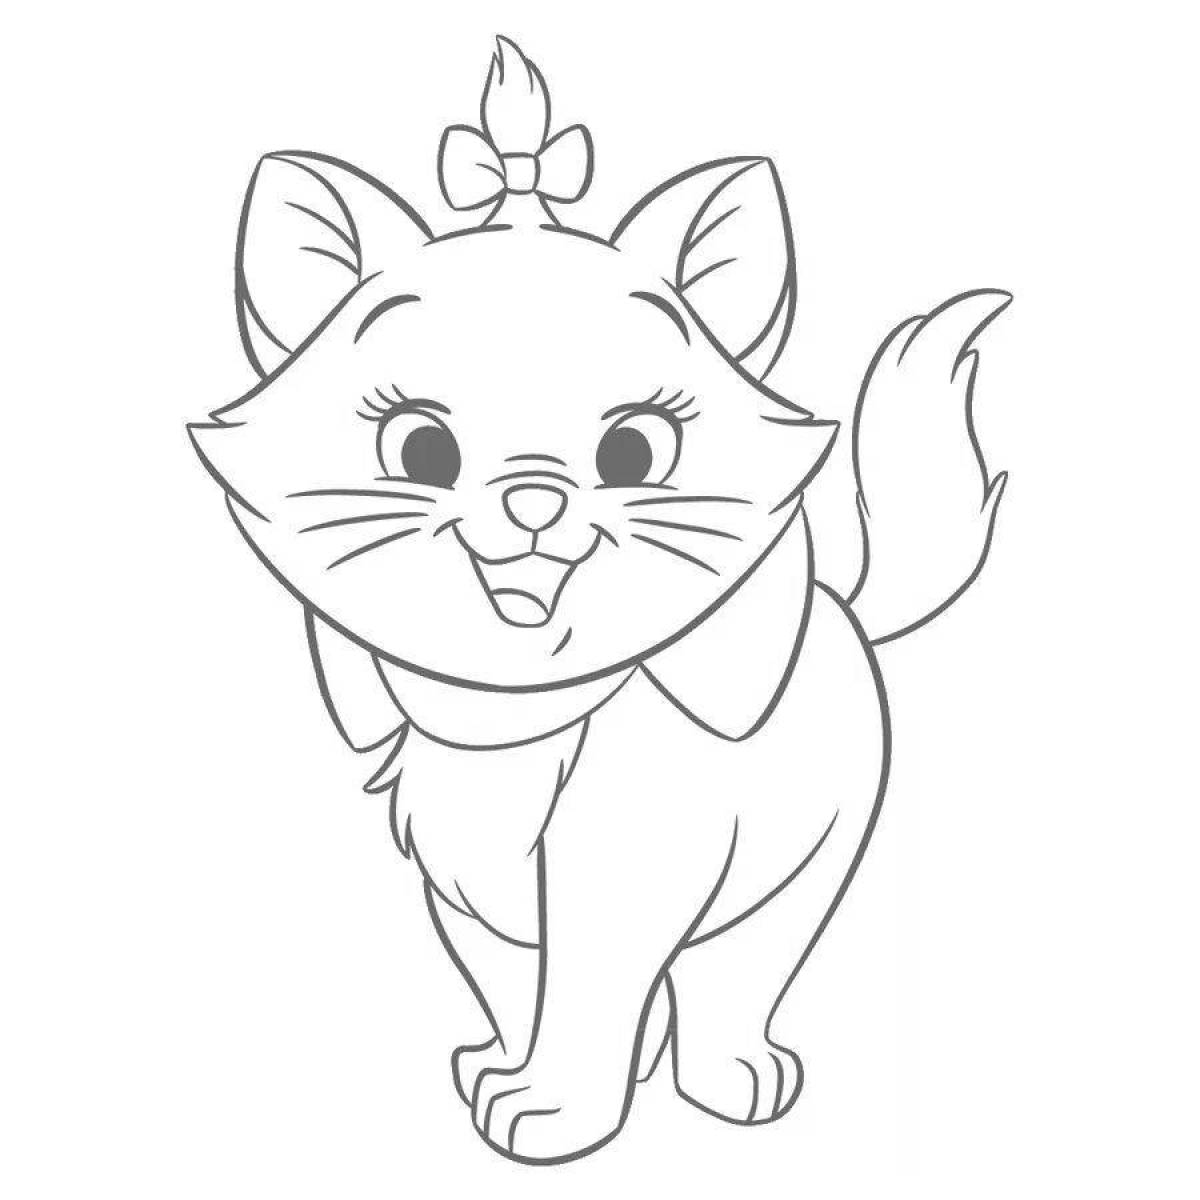 Coloring book cute kitten with a bow